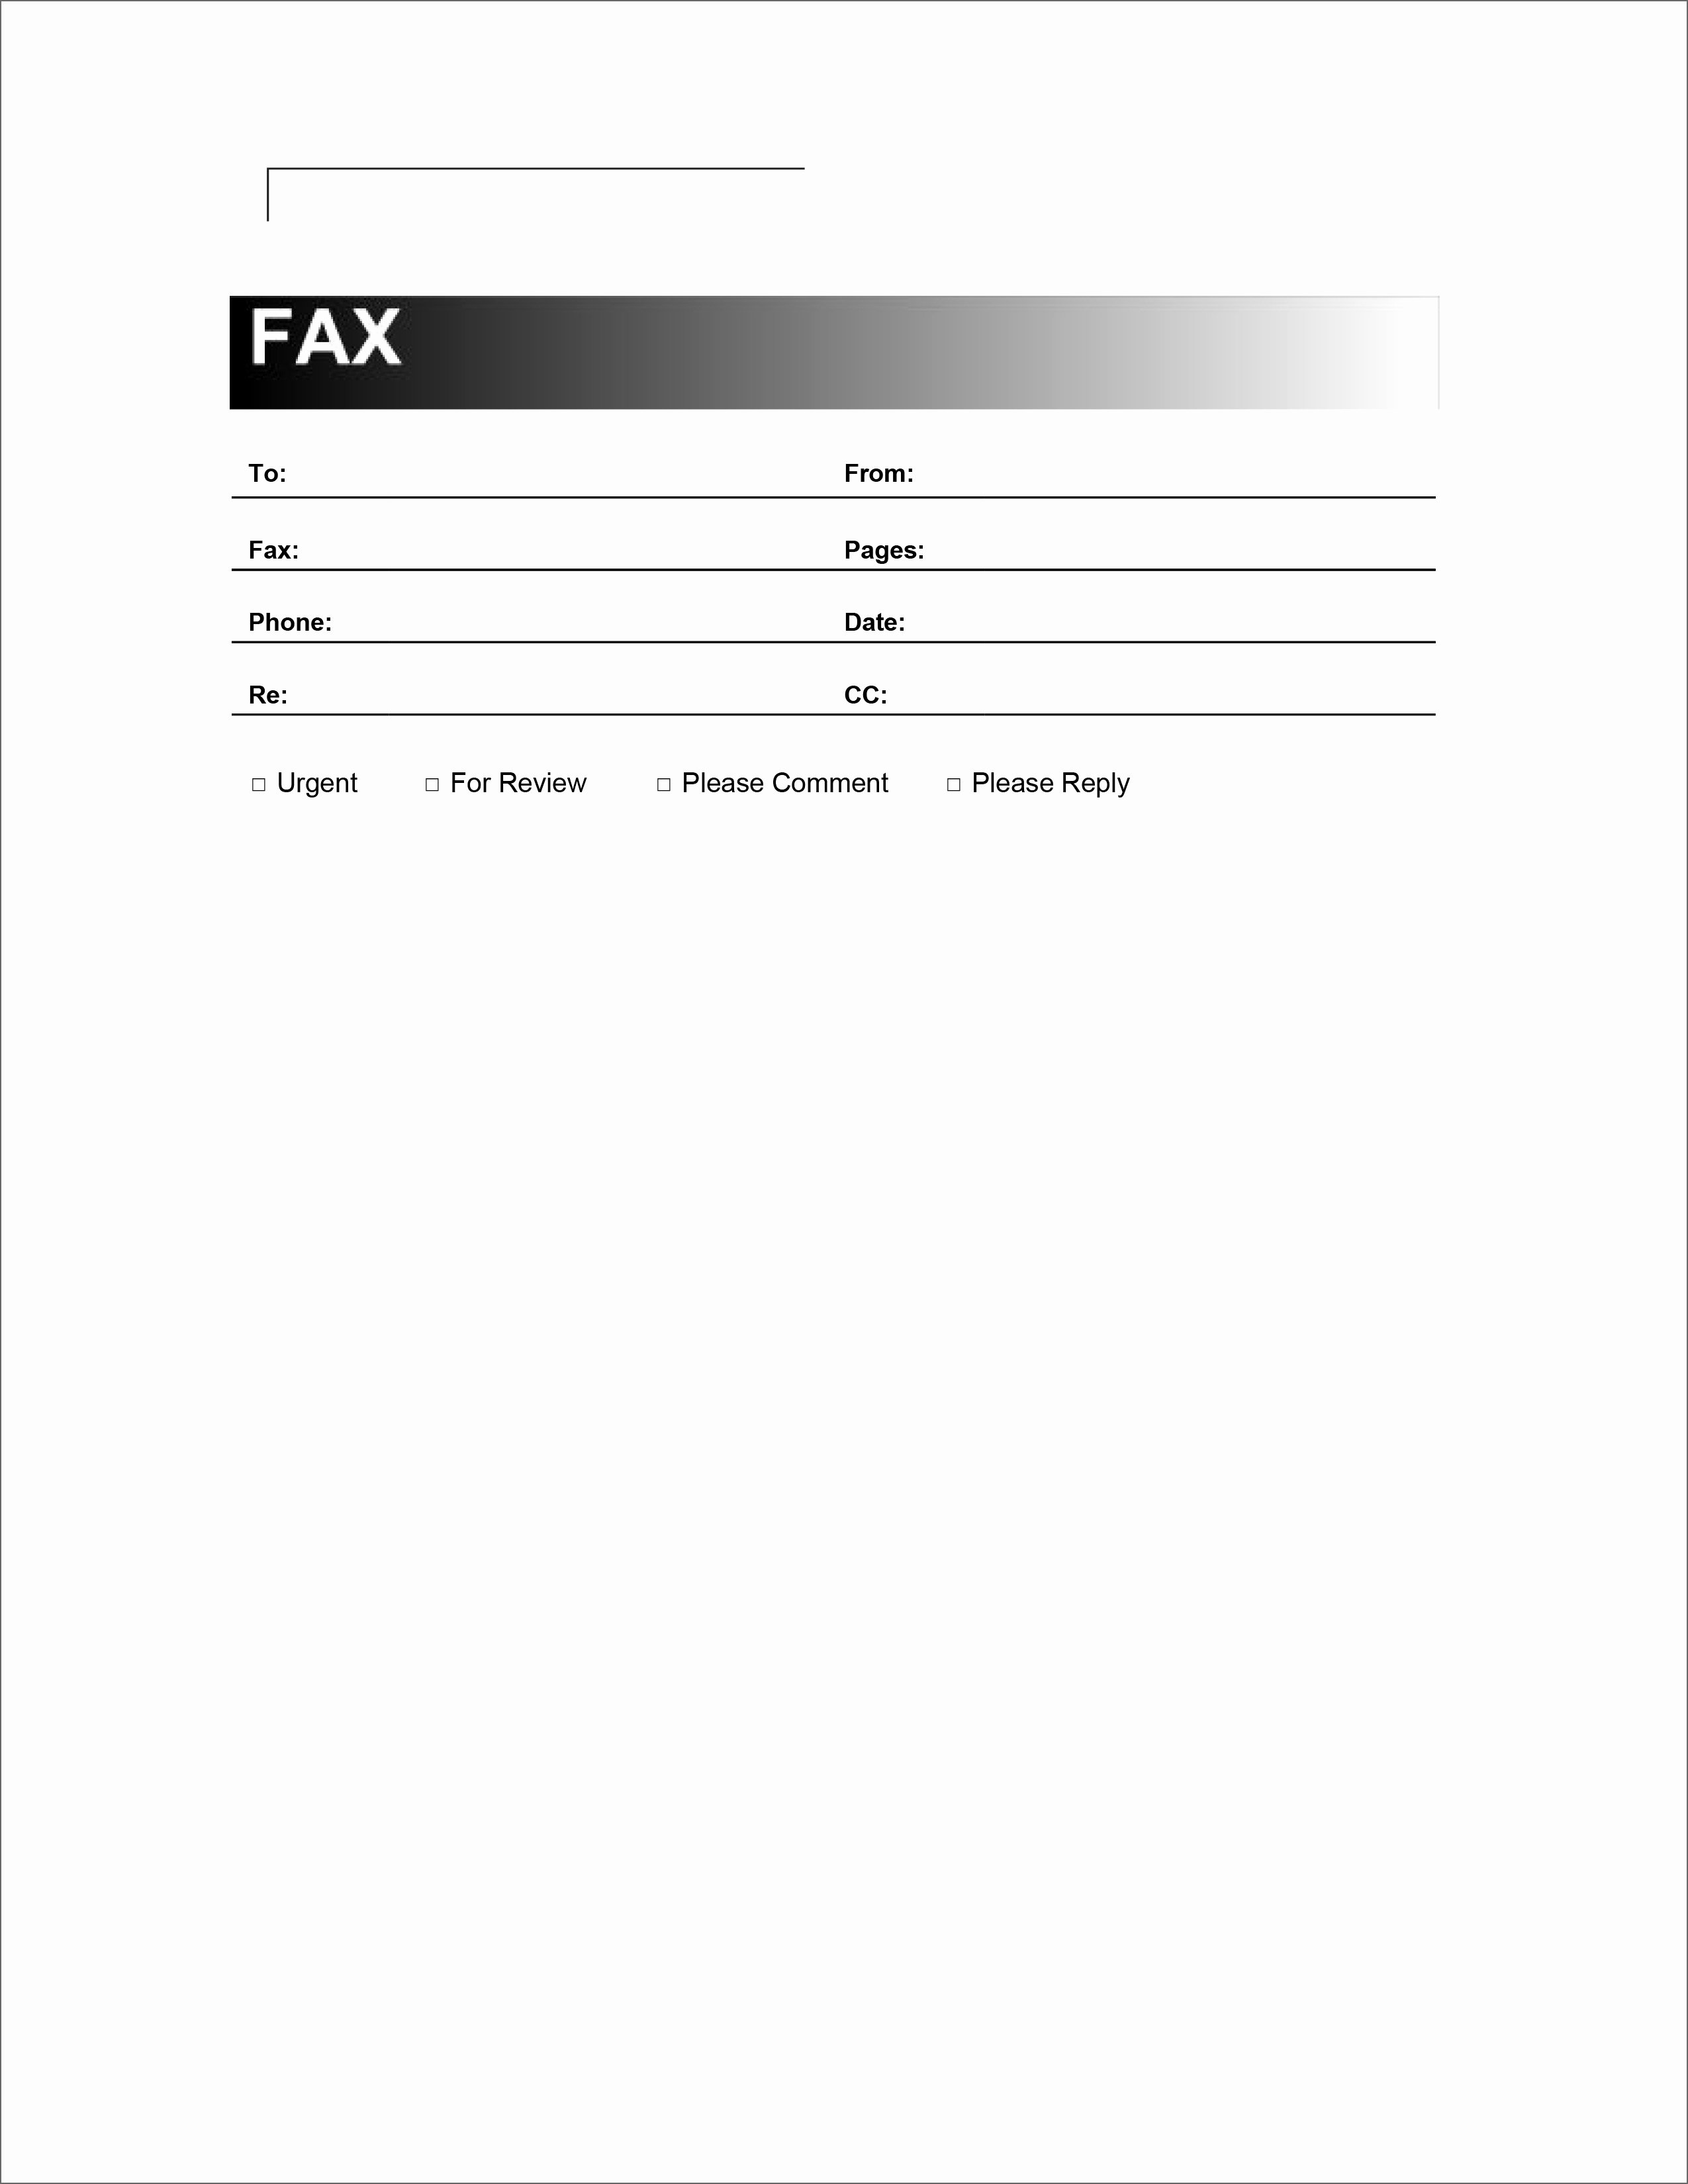 Fax Cover Sheet Template Word Awesome 20 Free Fax Cover Templates Sheets In Microsoft Fice Docx